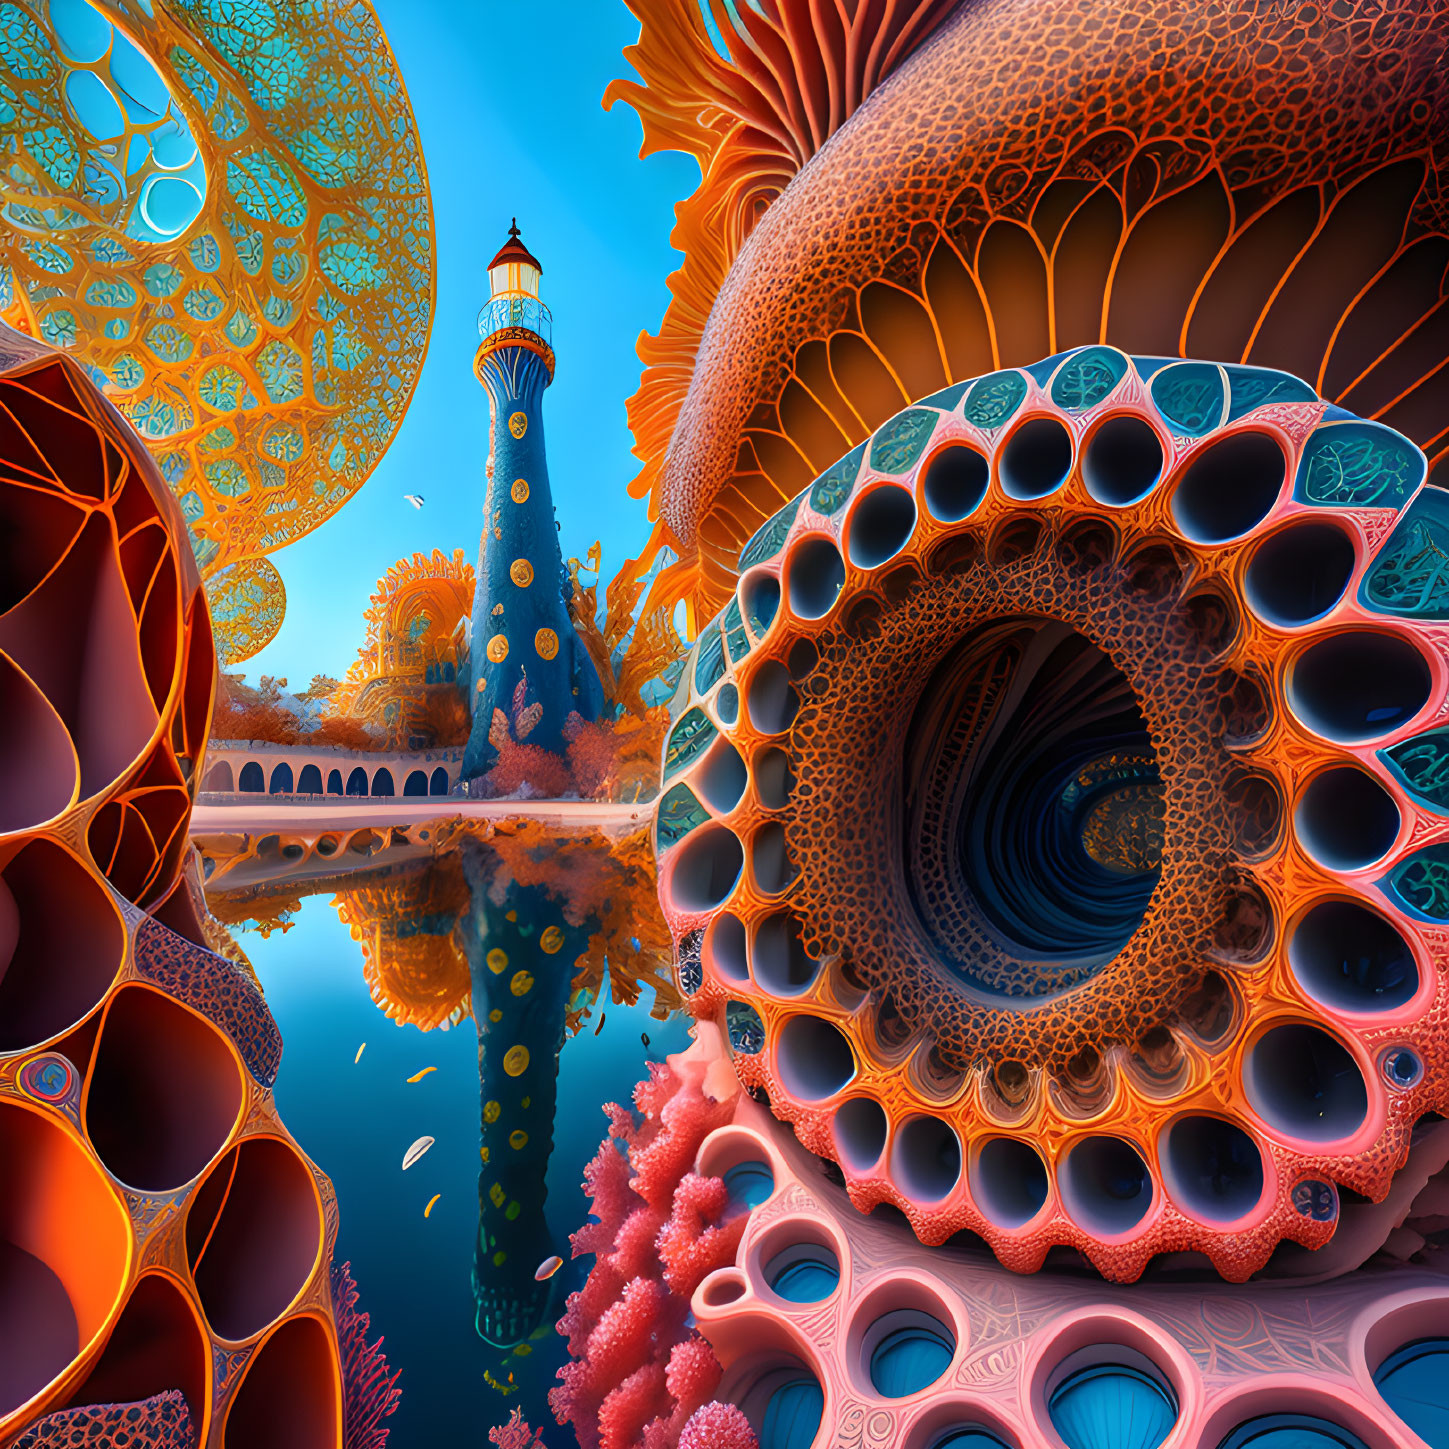 Colorful surreal landscape with fractal patterns, lighthouse, and intricate shapes.